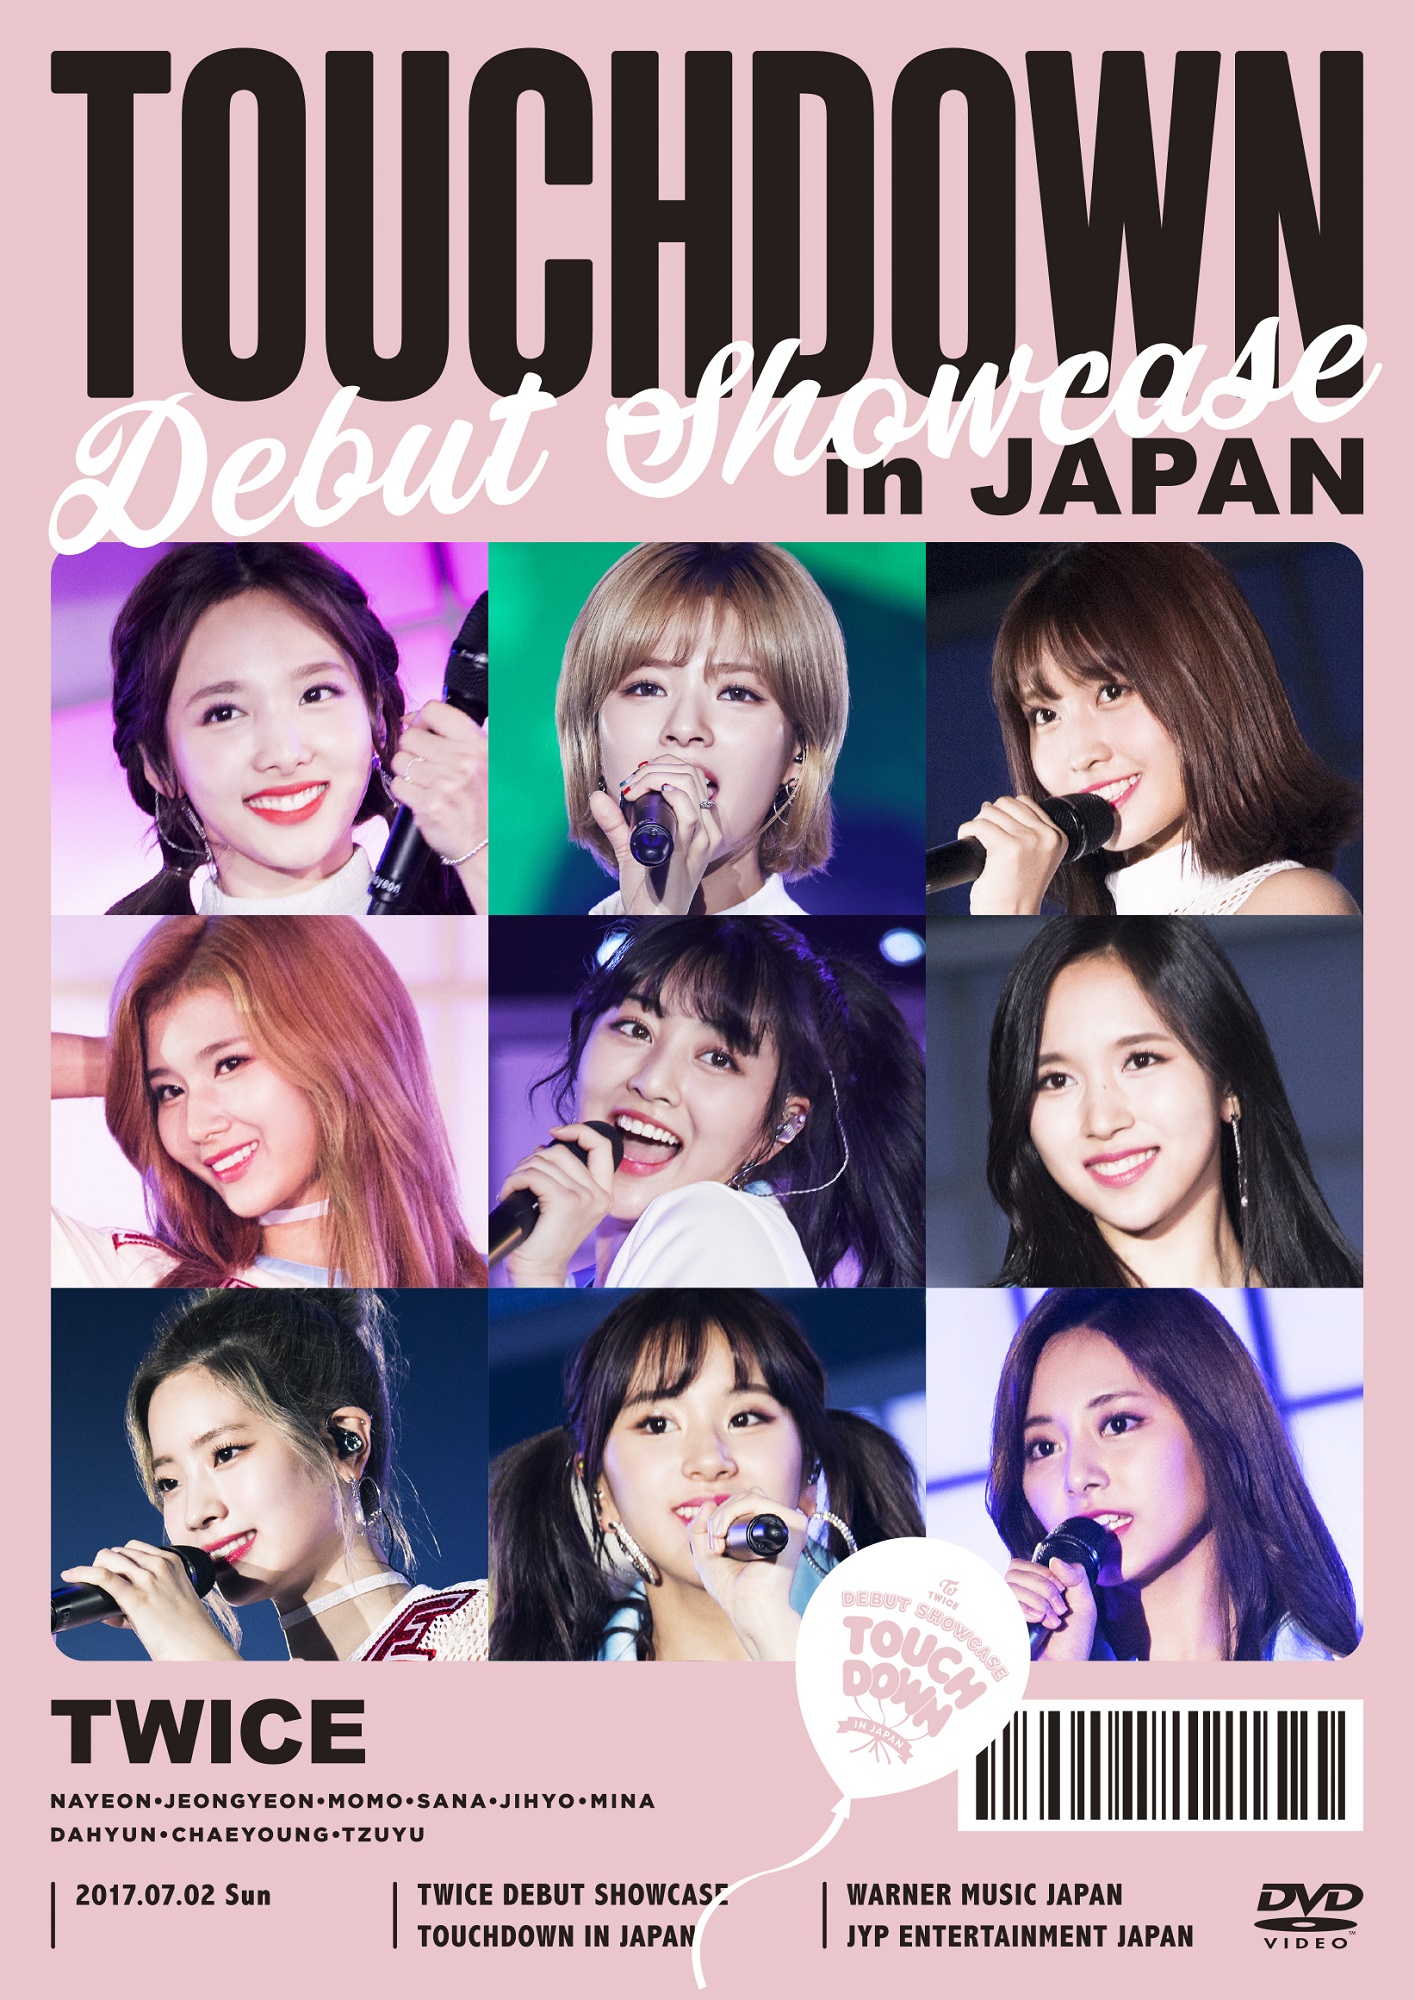 Blu-ray / DVD｜TWICE OFFICIAL SITE